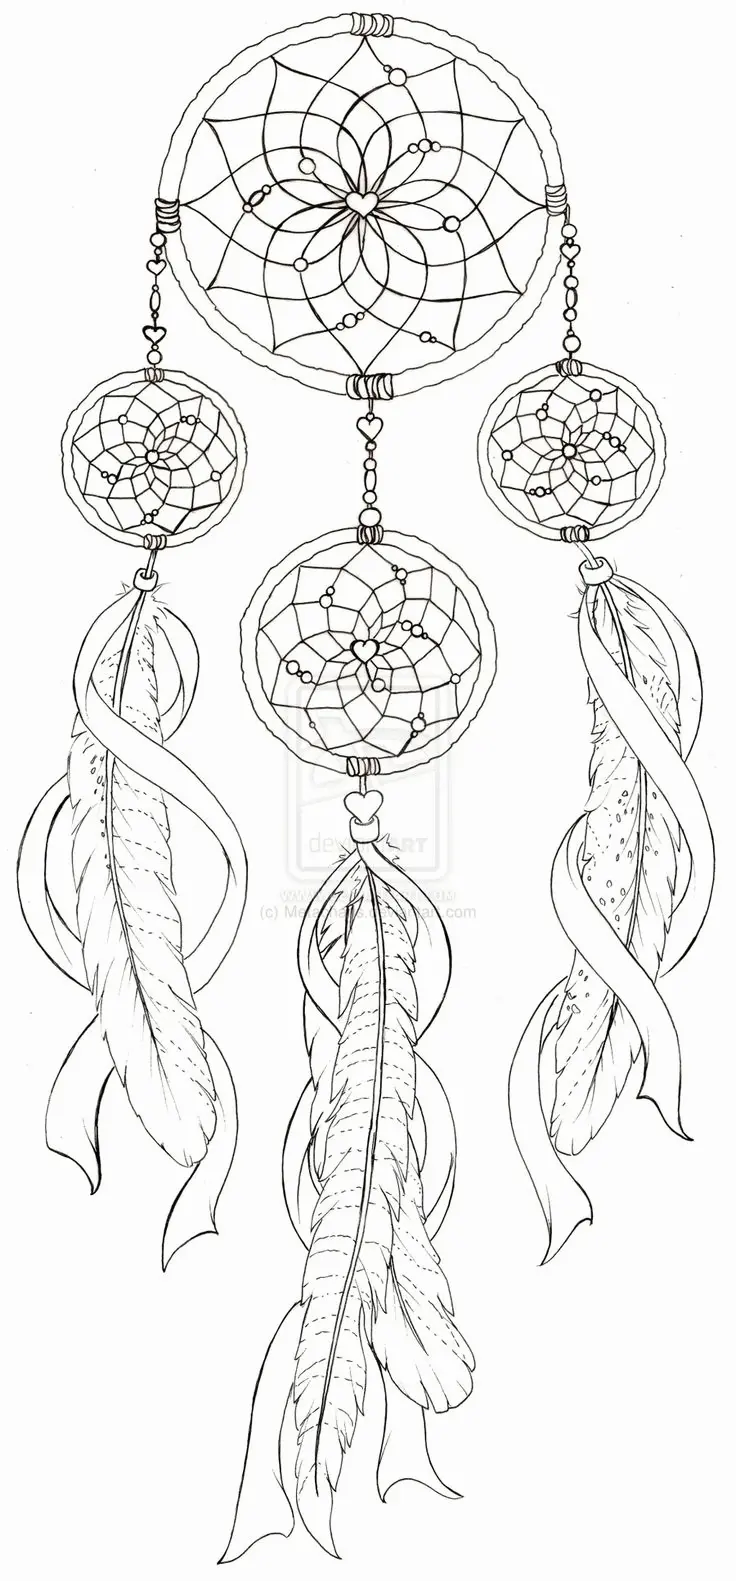 Dream Catcher Coloring Pages